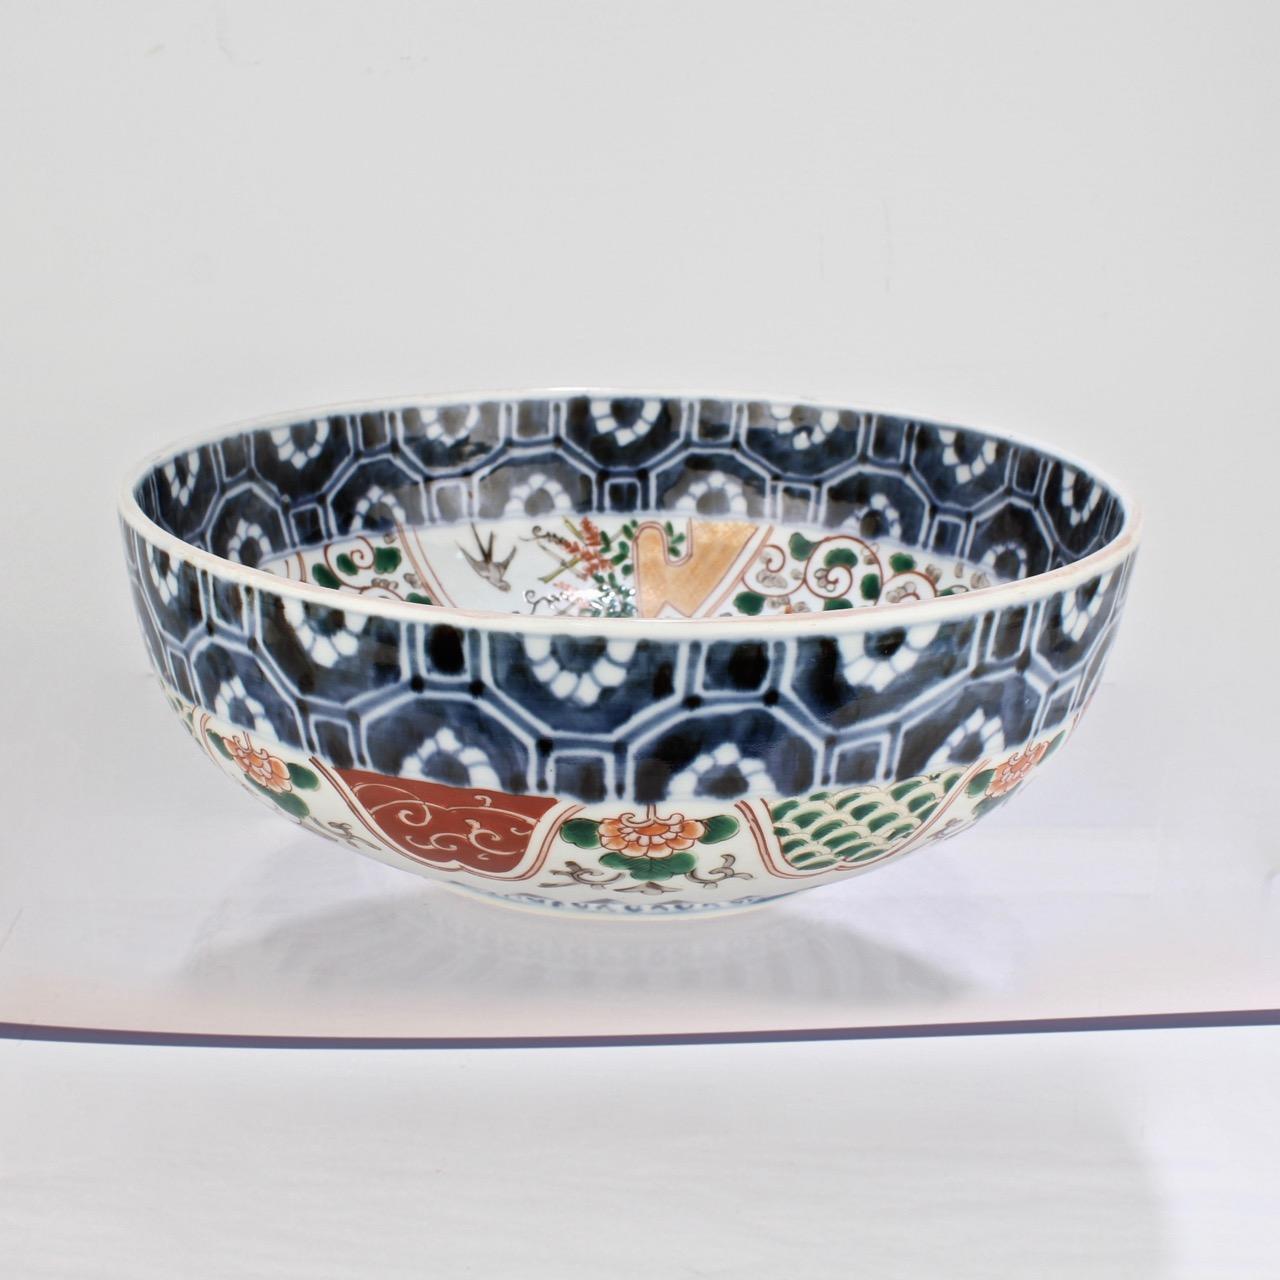 A fine, large antique Japanese Imari bowl.

Decorated with red, blue, green and ochre enamels throughout. 

Measures: Diameter: ca. 12 /12 in.





 